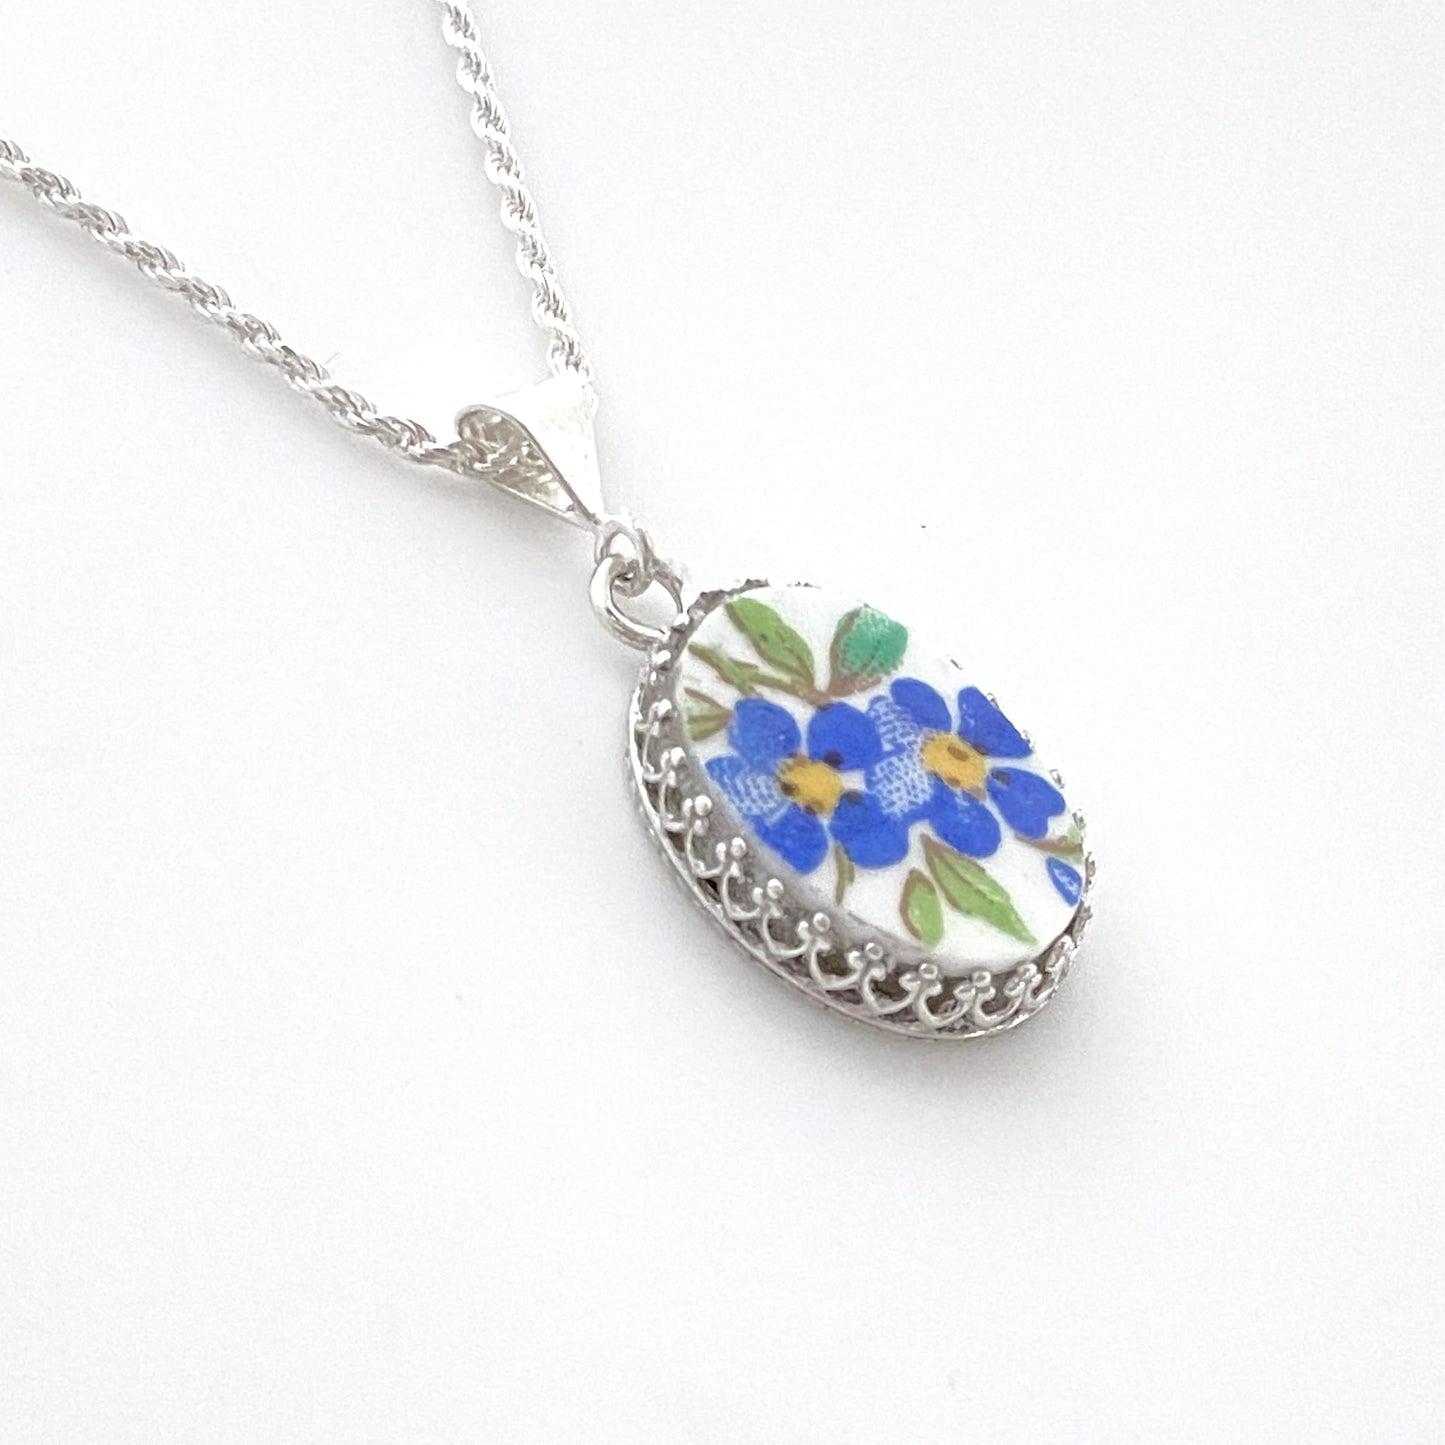 Forget Me Not Necklace, Broken China Jewelry, Handmade Jewelry, Anniversary Gift for Wife, Unique Birthday Gift